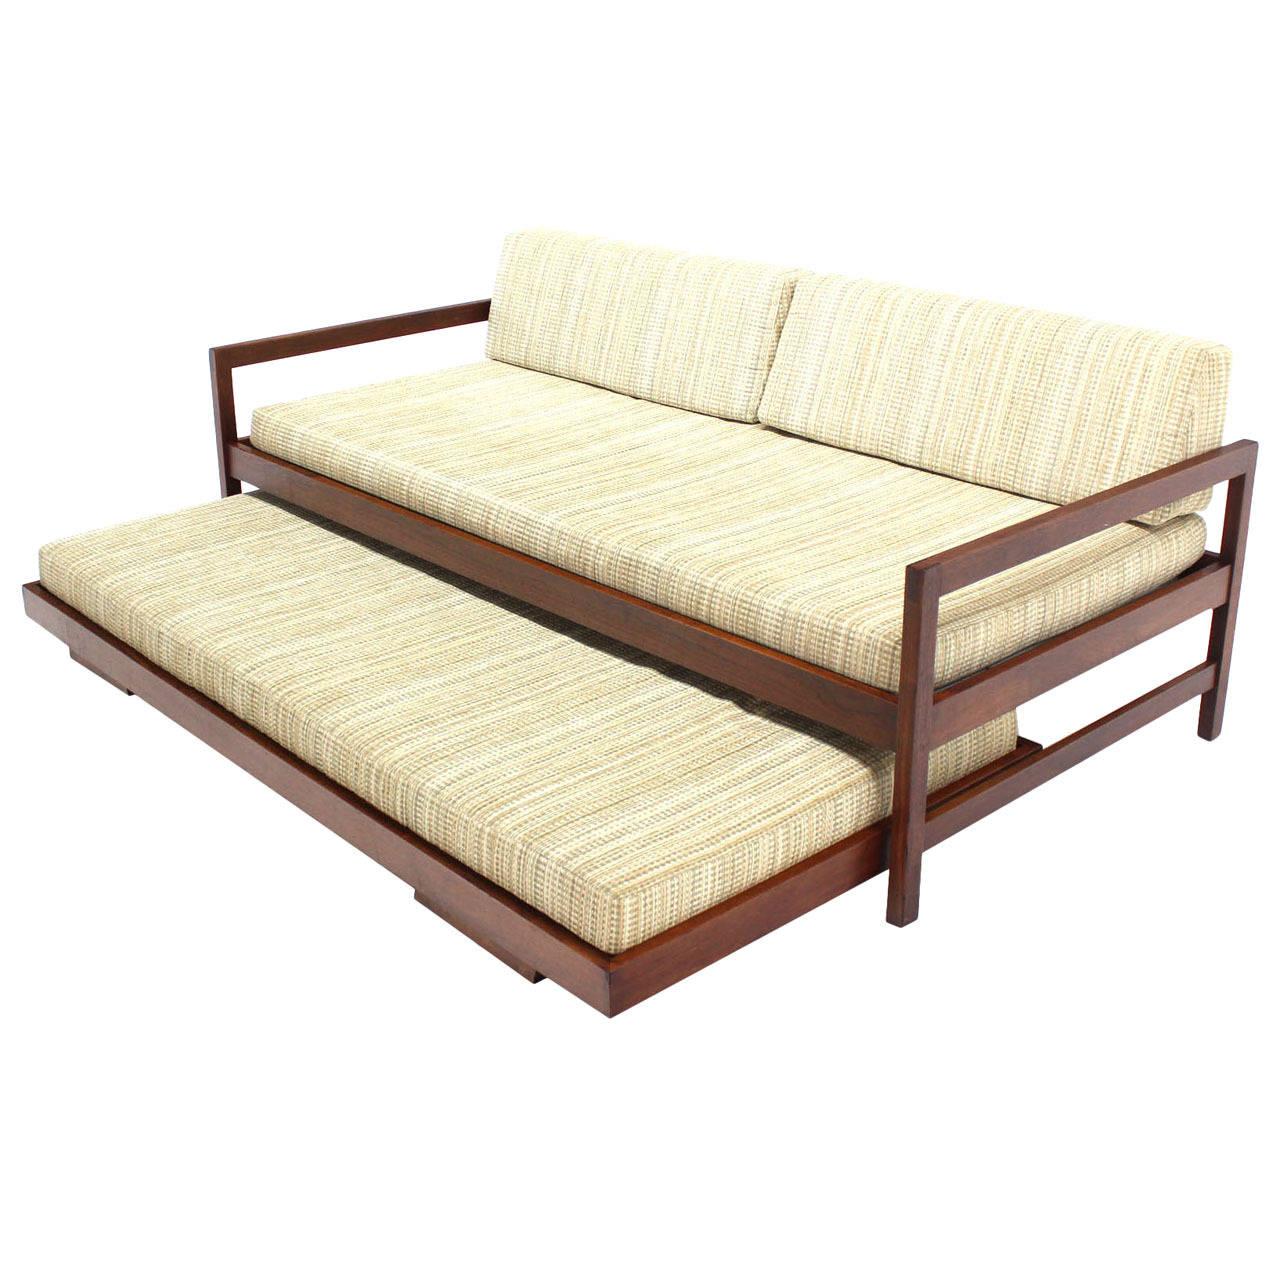 Solid Walnut Frame Mid-Century Modern Trundle, Pull-Out Daybed For Sale